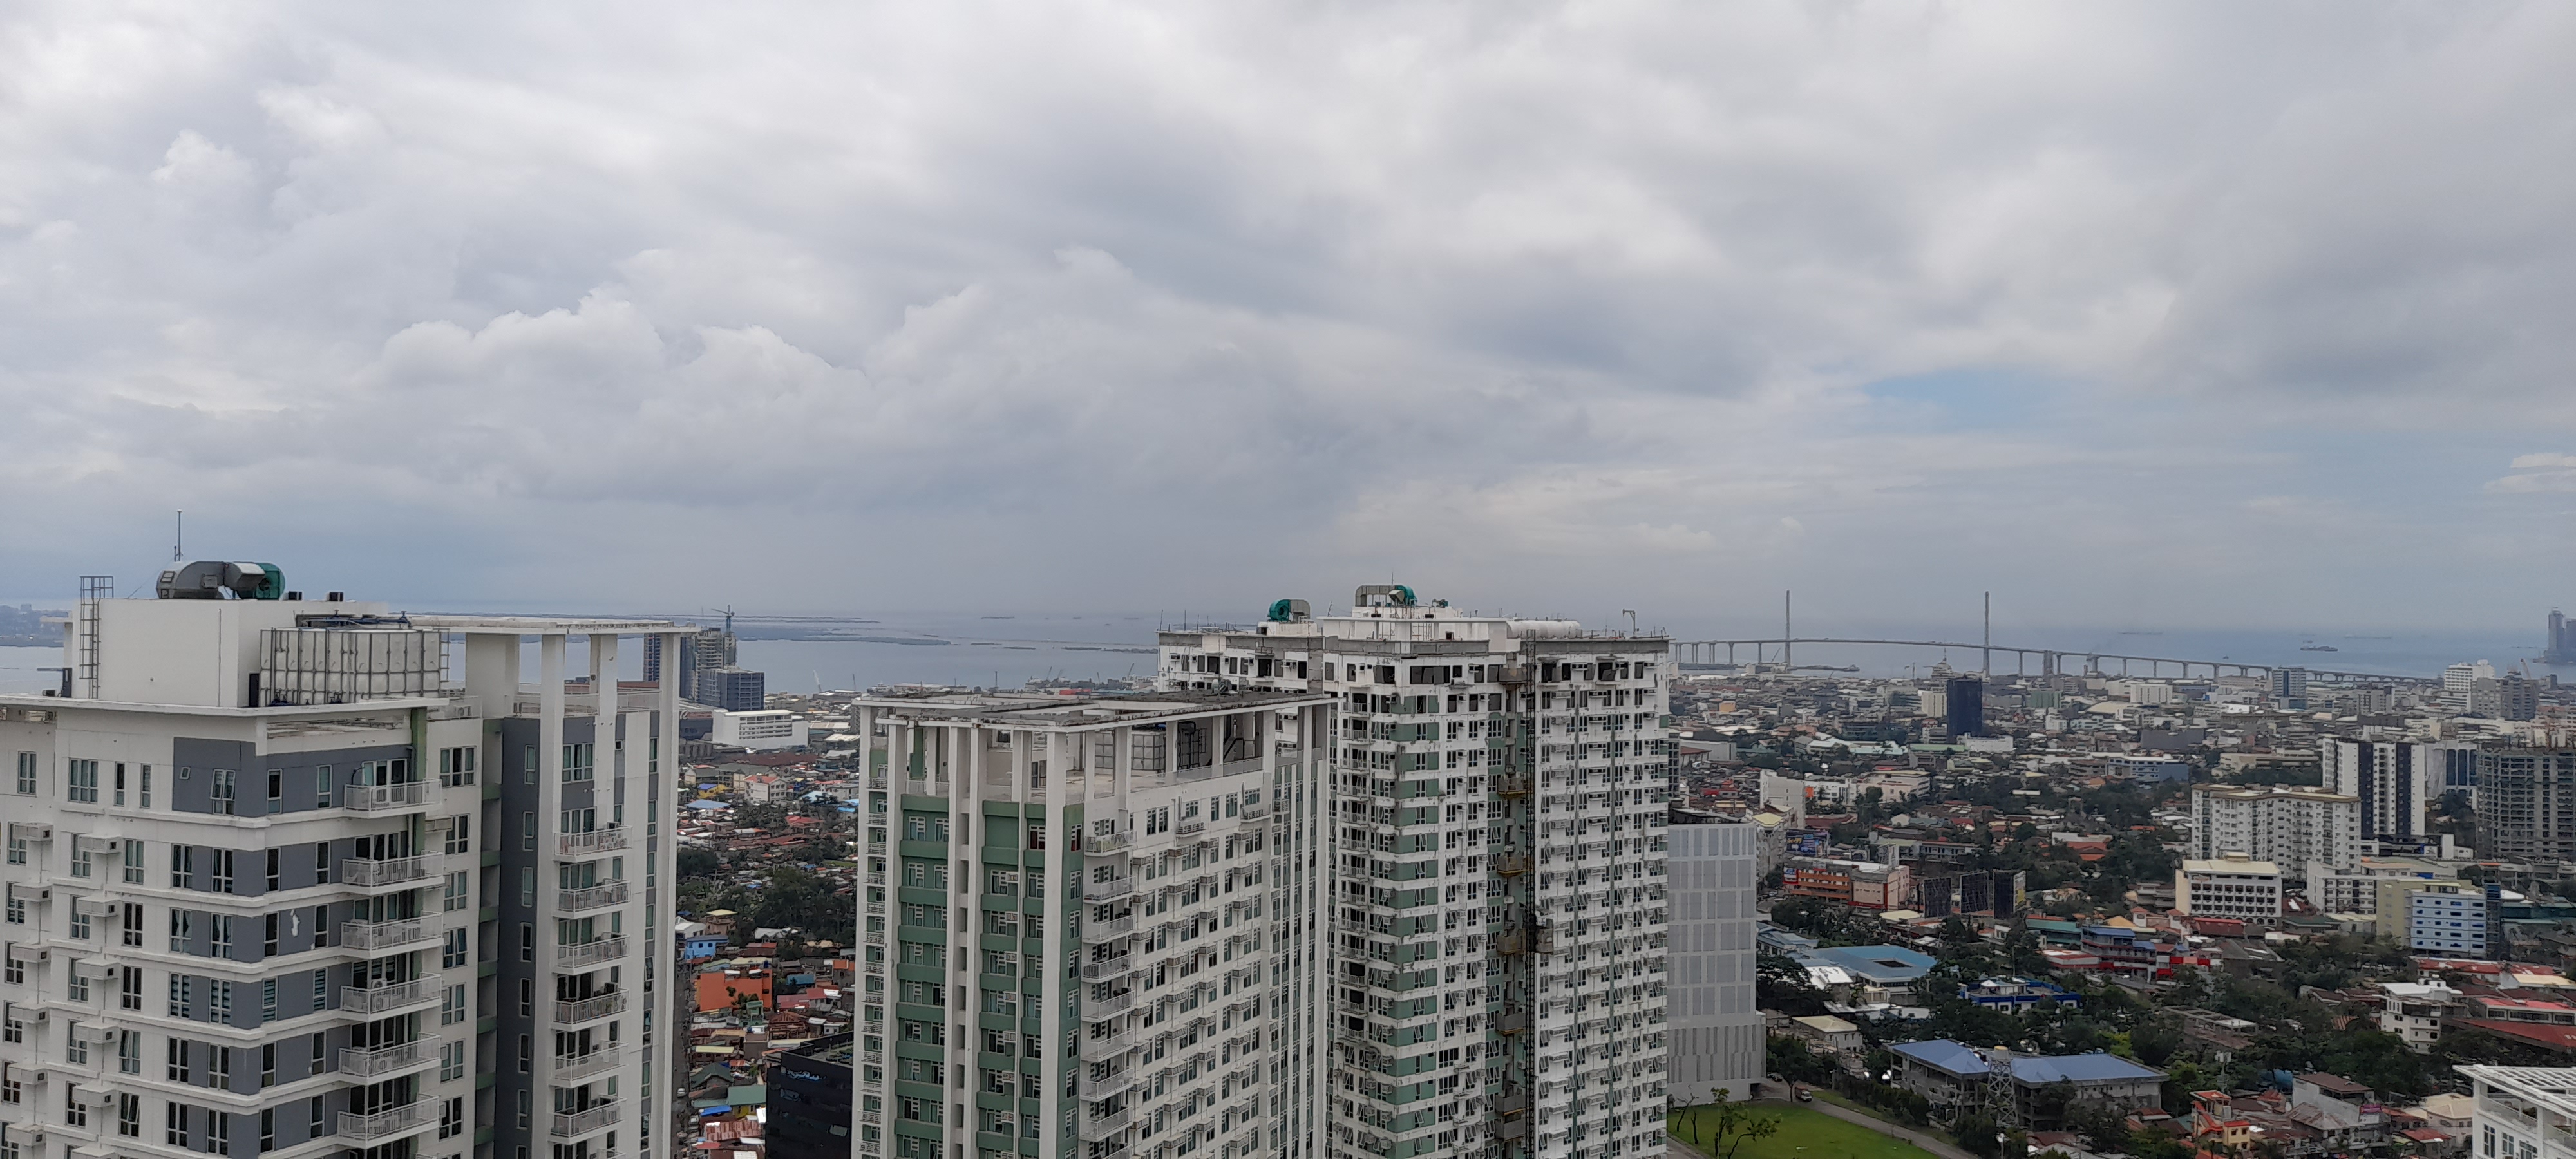 1-bedroom-furnished-with-view-at-the-alcoves-cebu-business-park-cebu-city